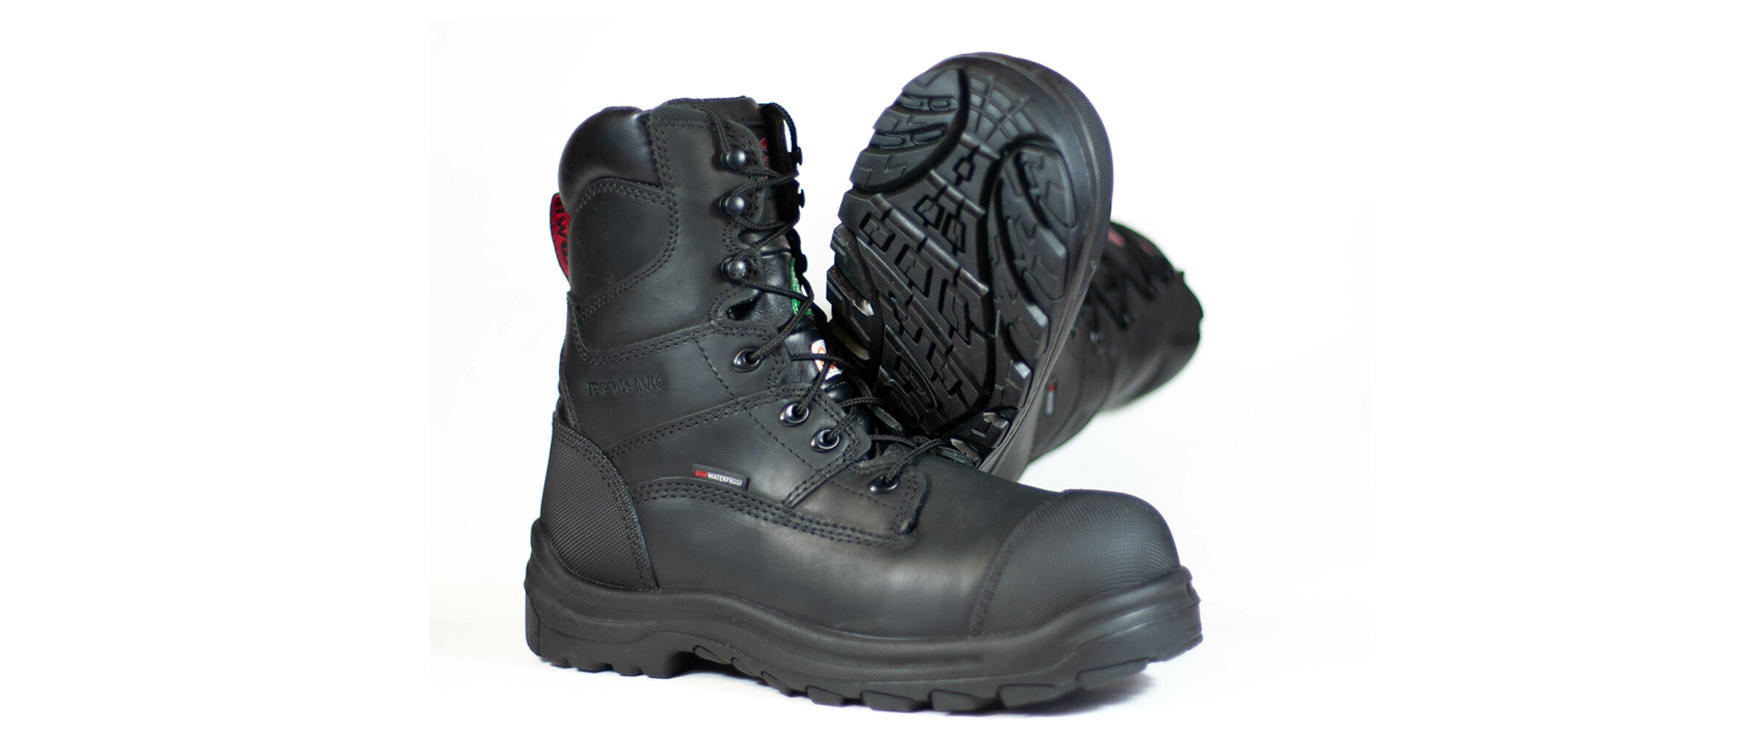 2. Red Wing King Toe 8-Inch Waterproof CSA Safety Toe (Style 3512)